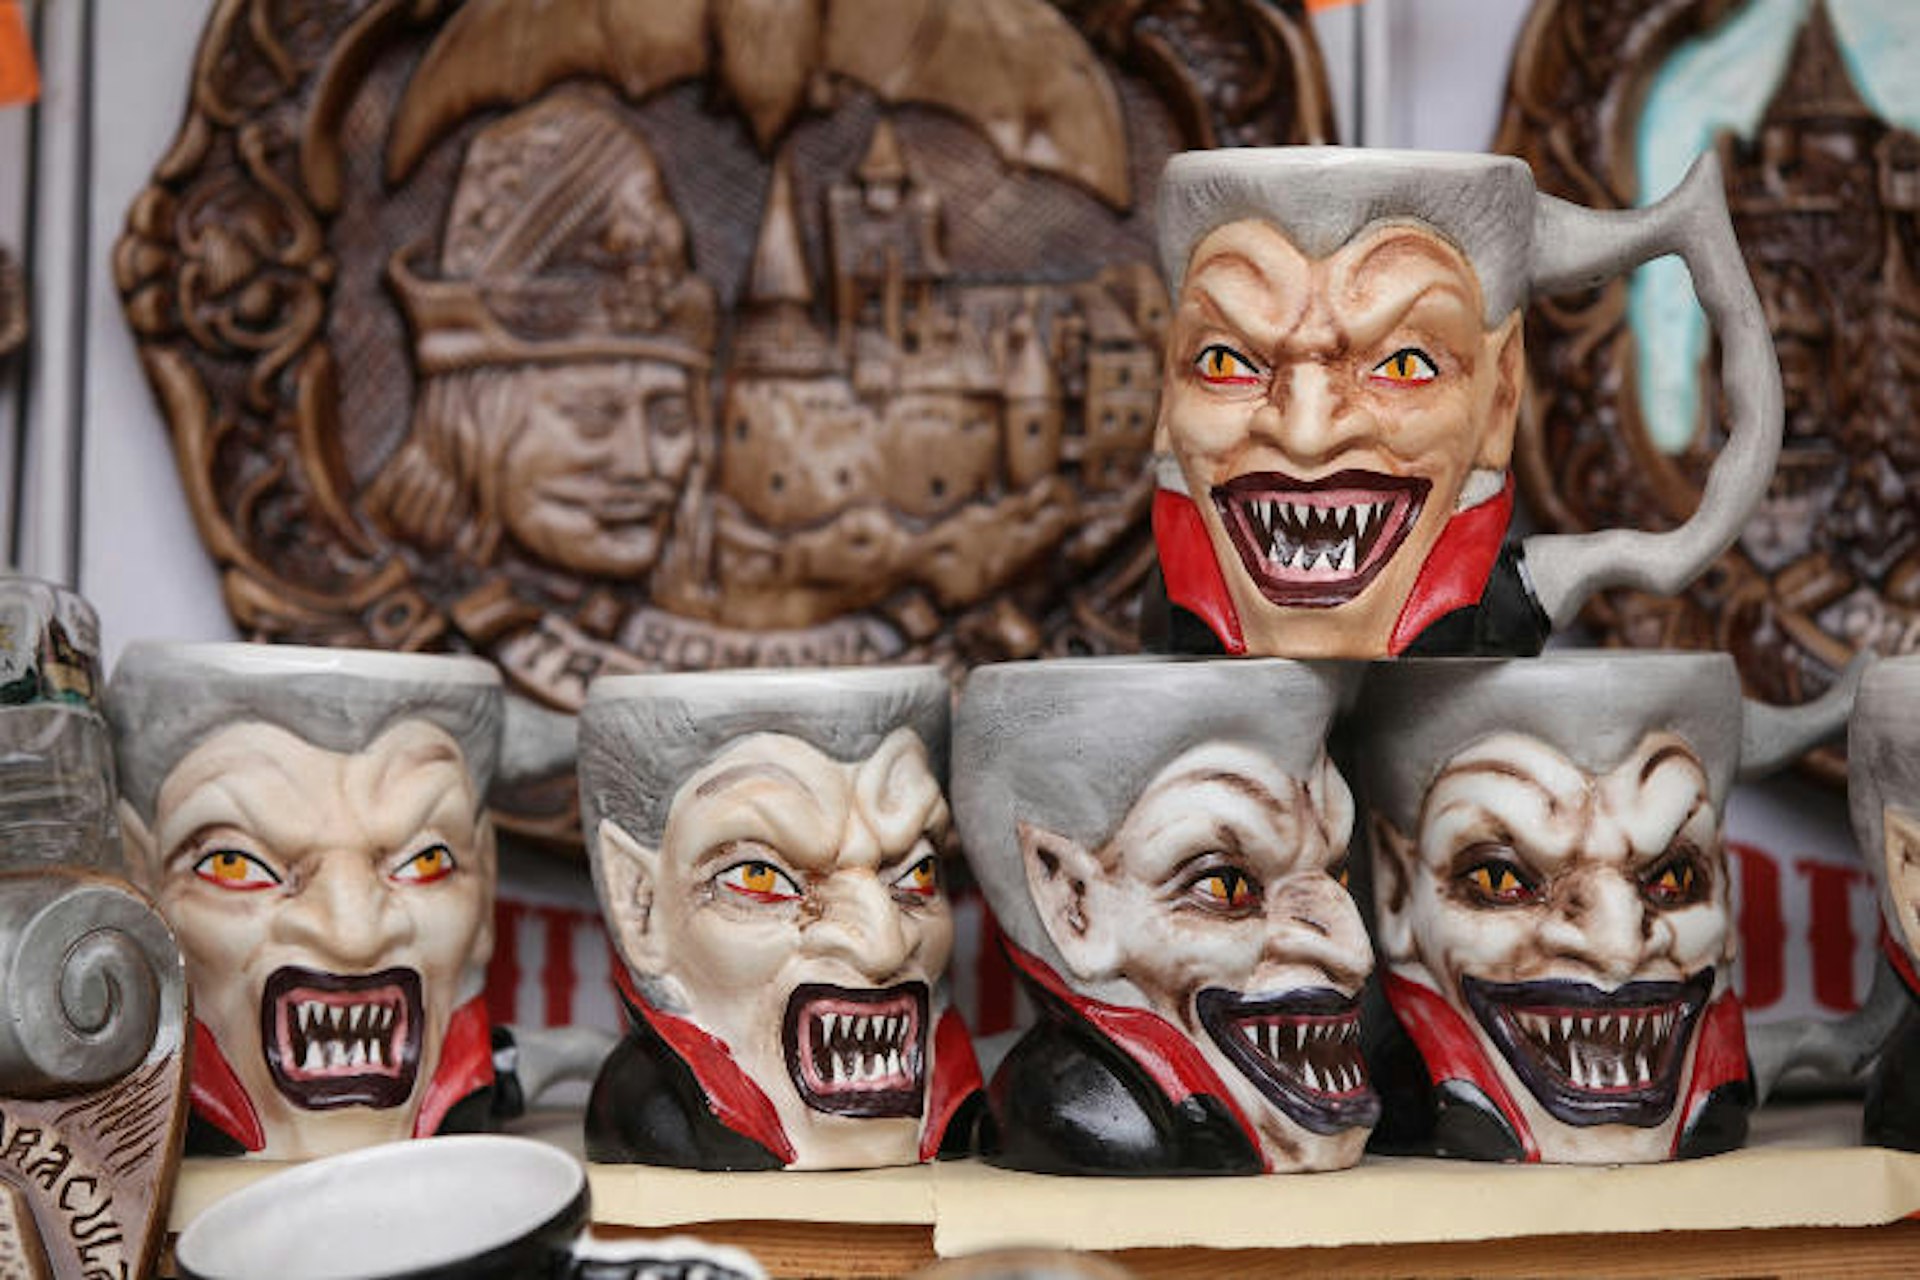 Dracula mugs on display at a souvenir shop at Bran Castle. Image by Sean Gallup / Getty Images